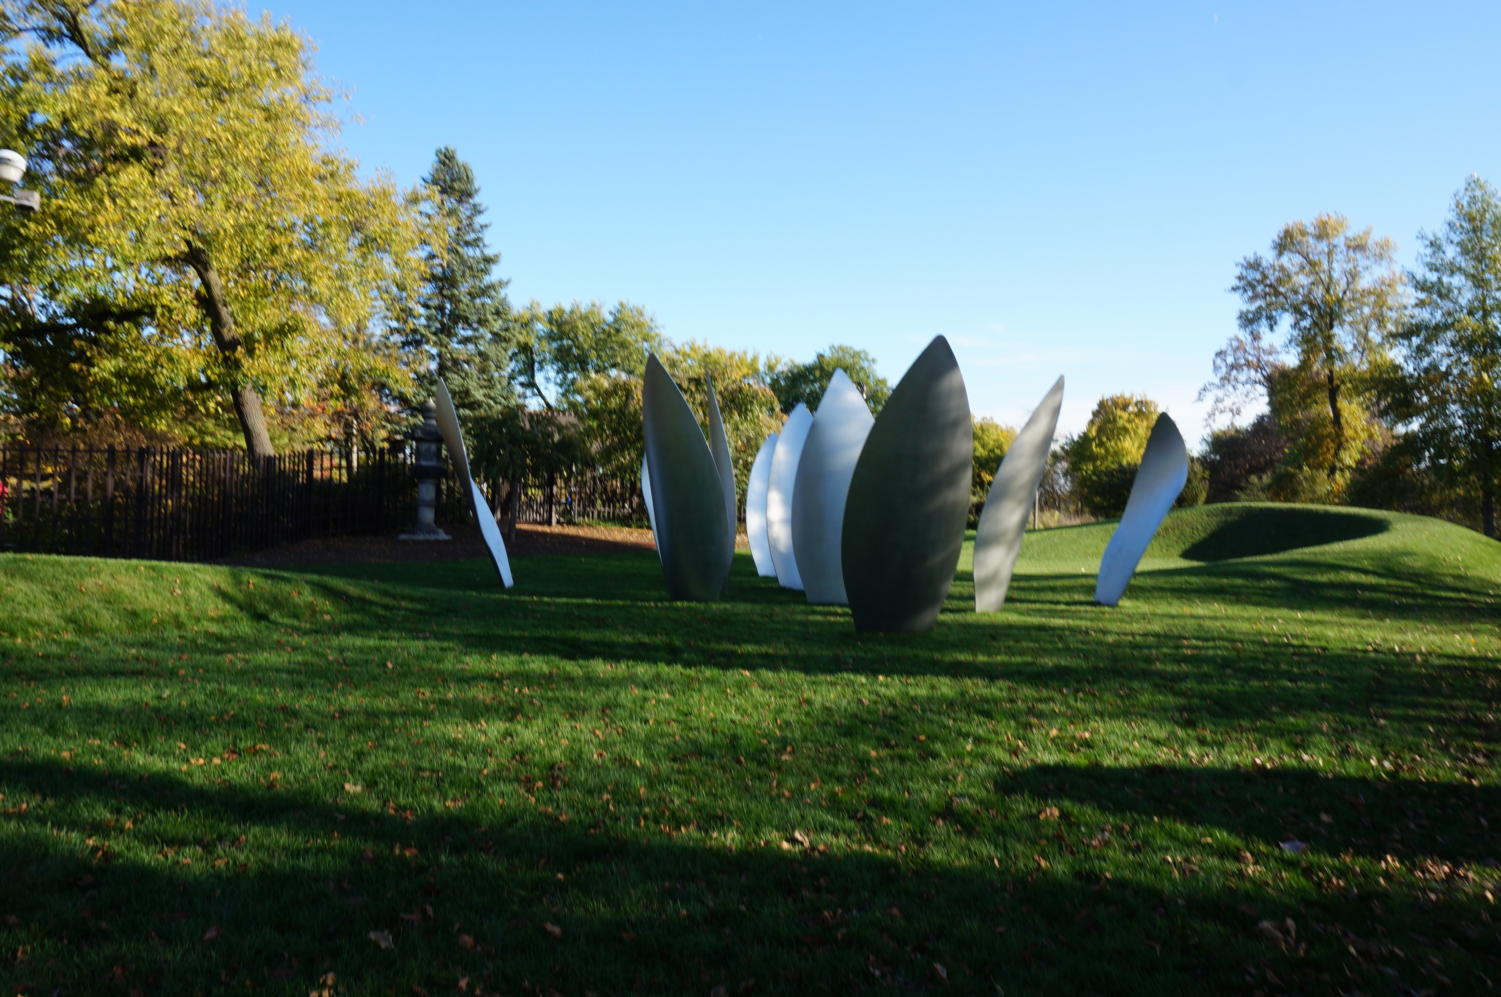 Yoko Ono's sculpture was installed in Jackson Park this fall.